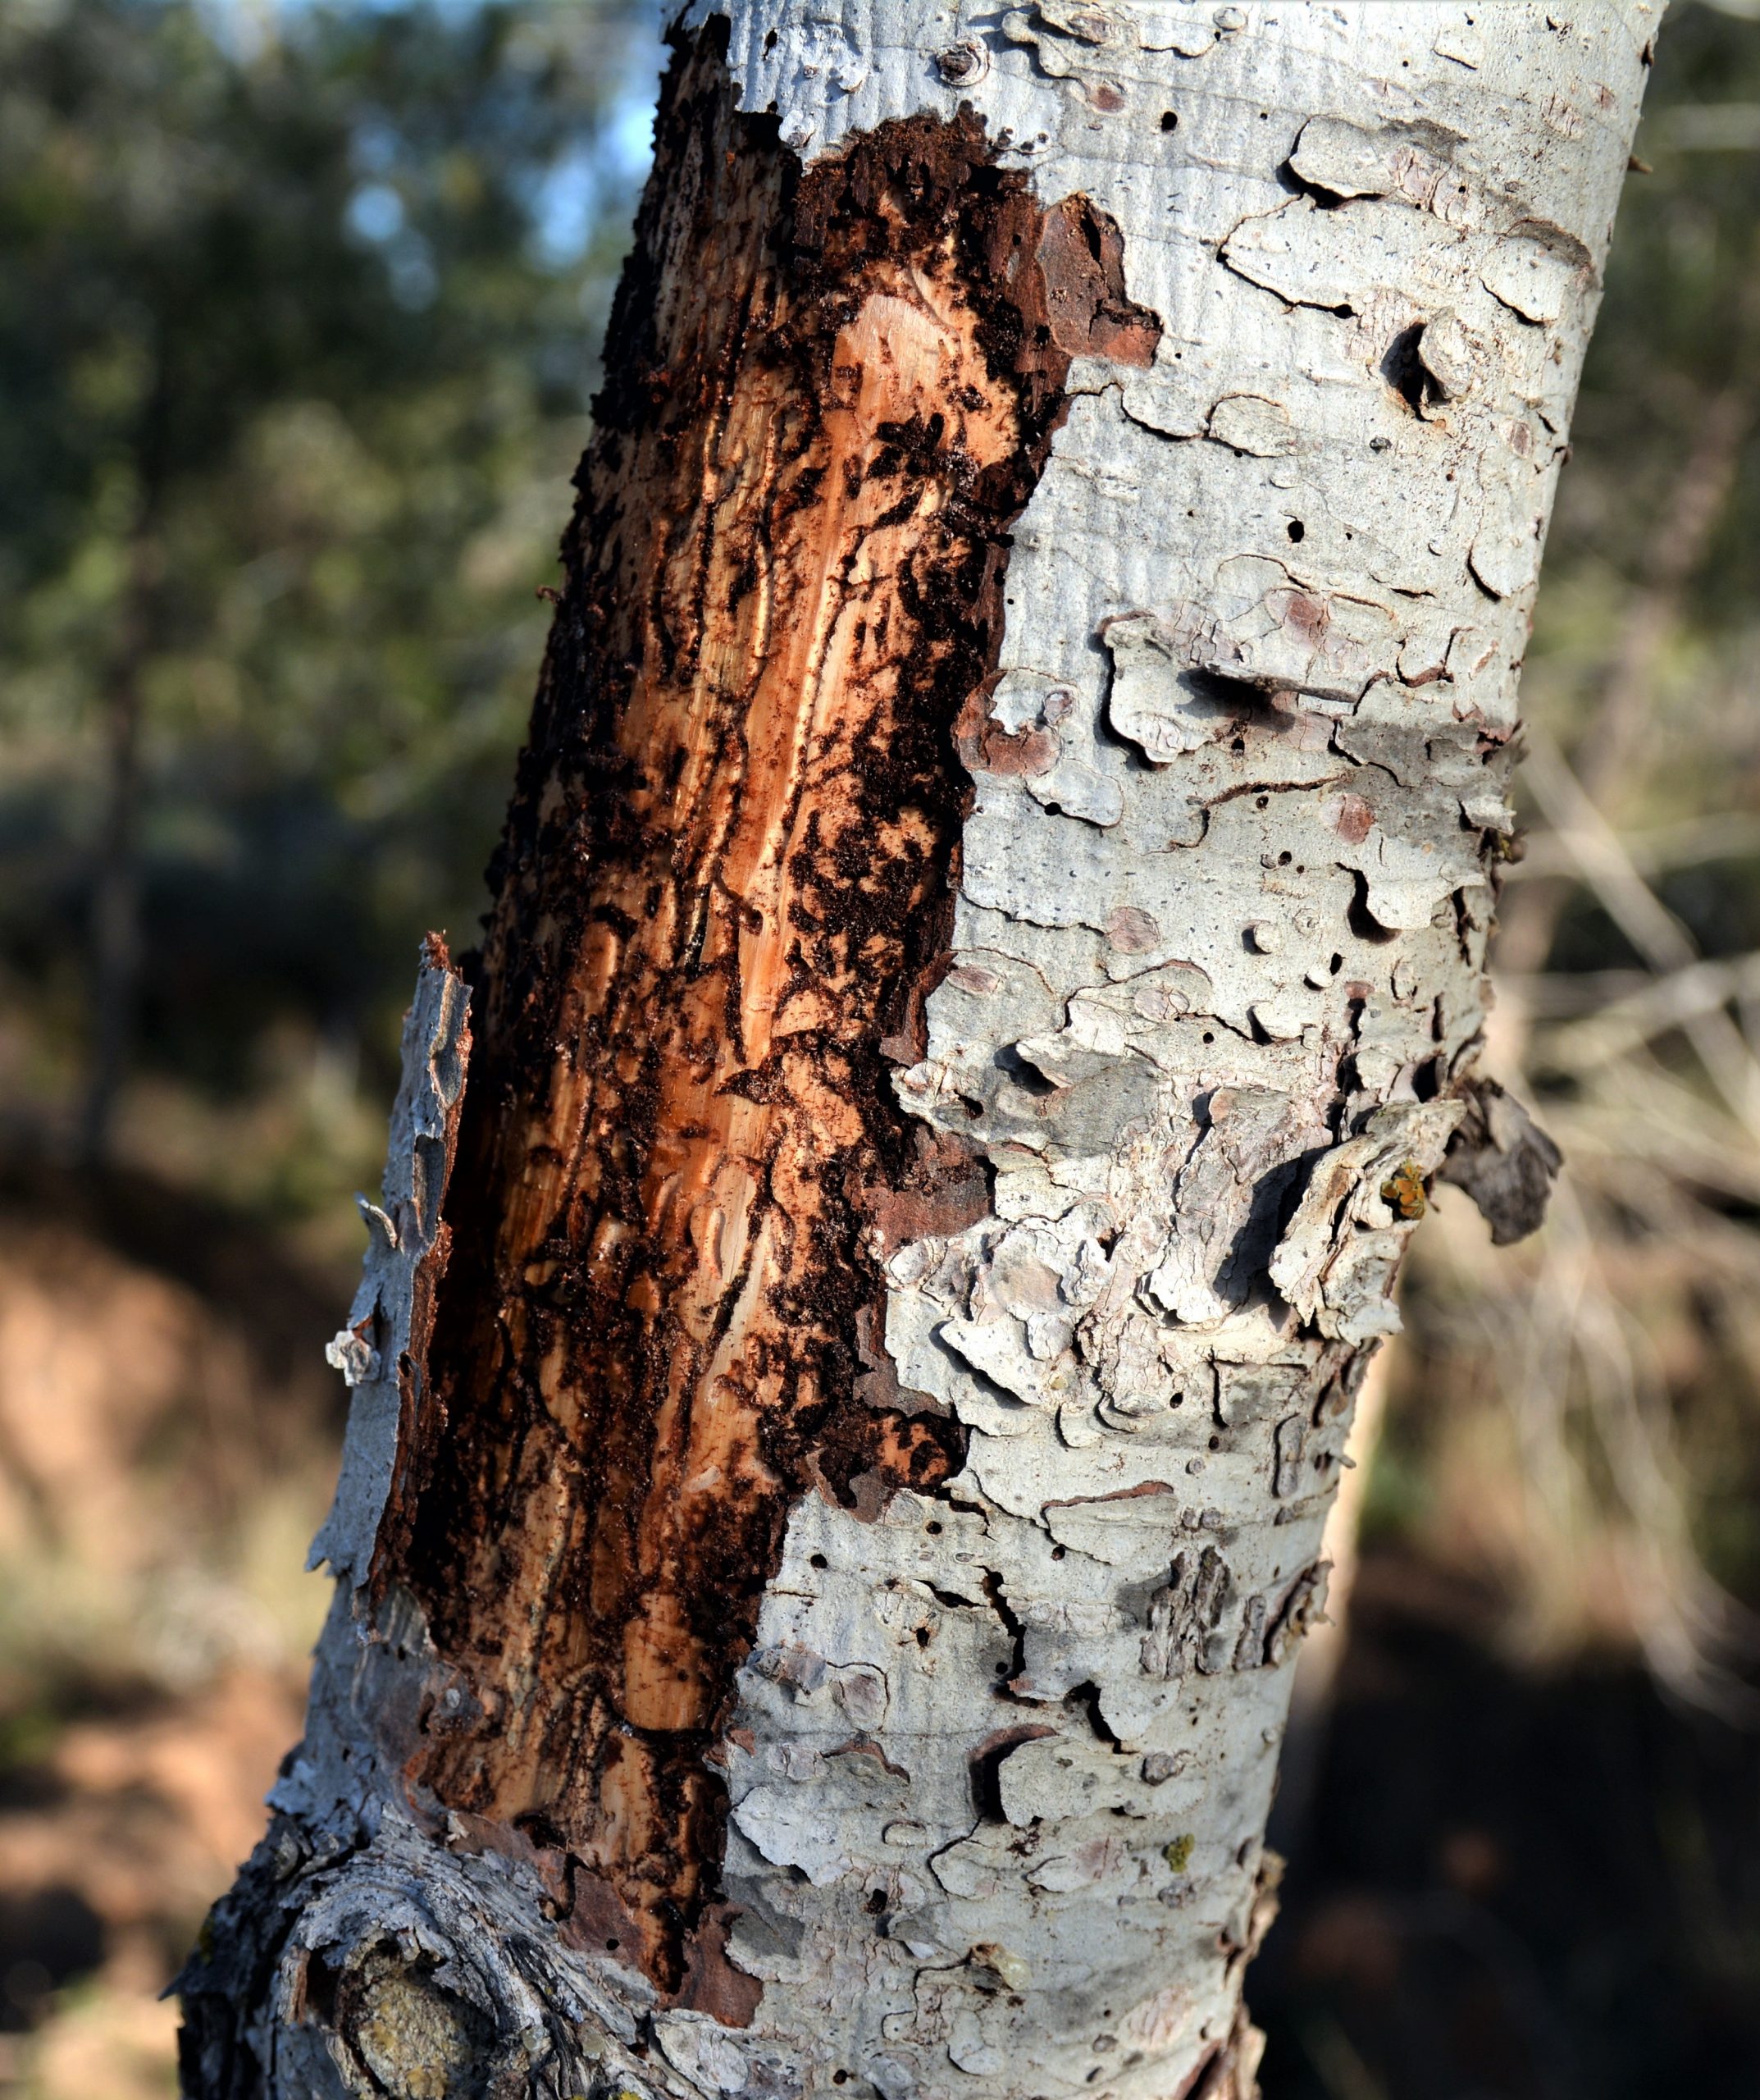 A young pine tree that was attacked by Pathogens calcaratus. Photo by Omer Golan